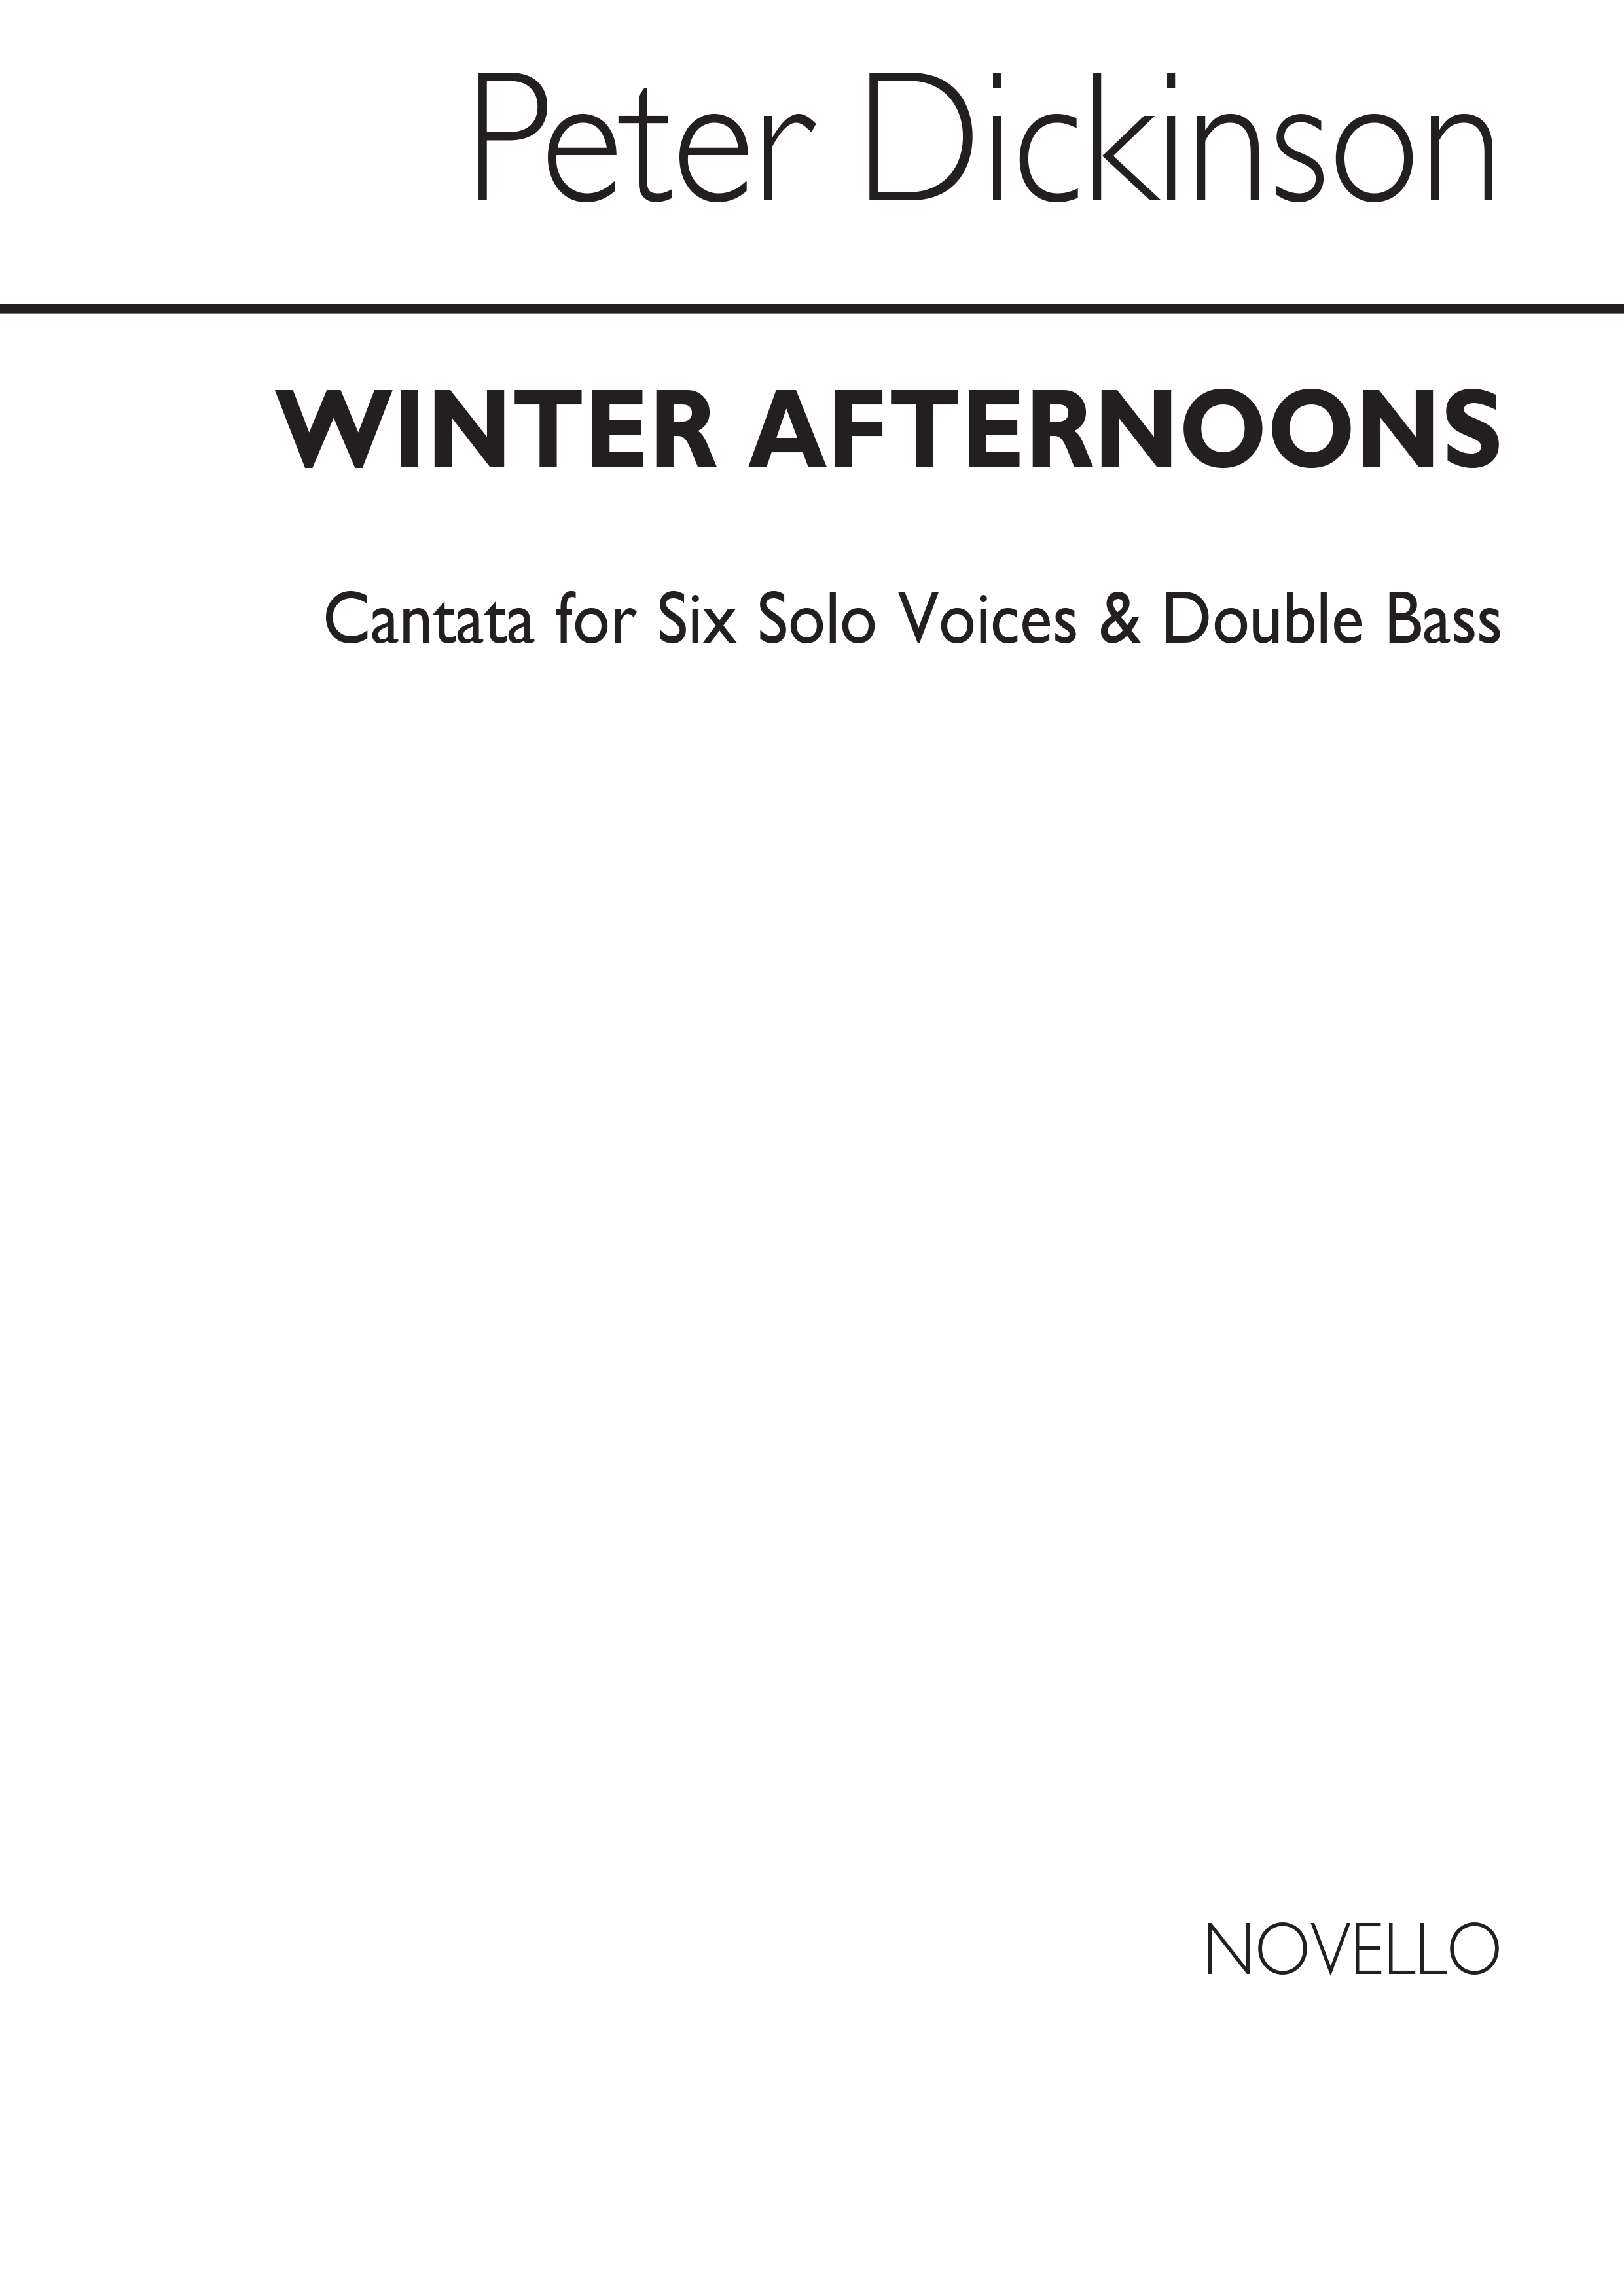 Dickinson: Winter Afternoons for AATTBB Chorus and Double Bass